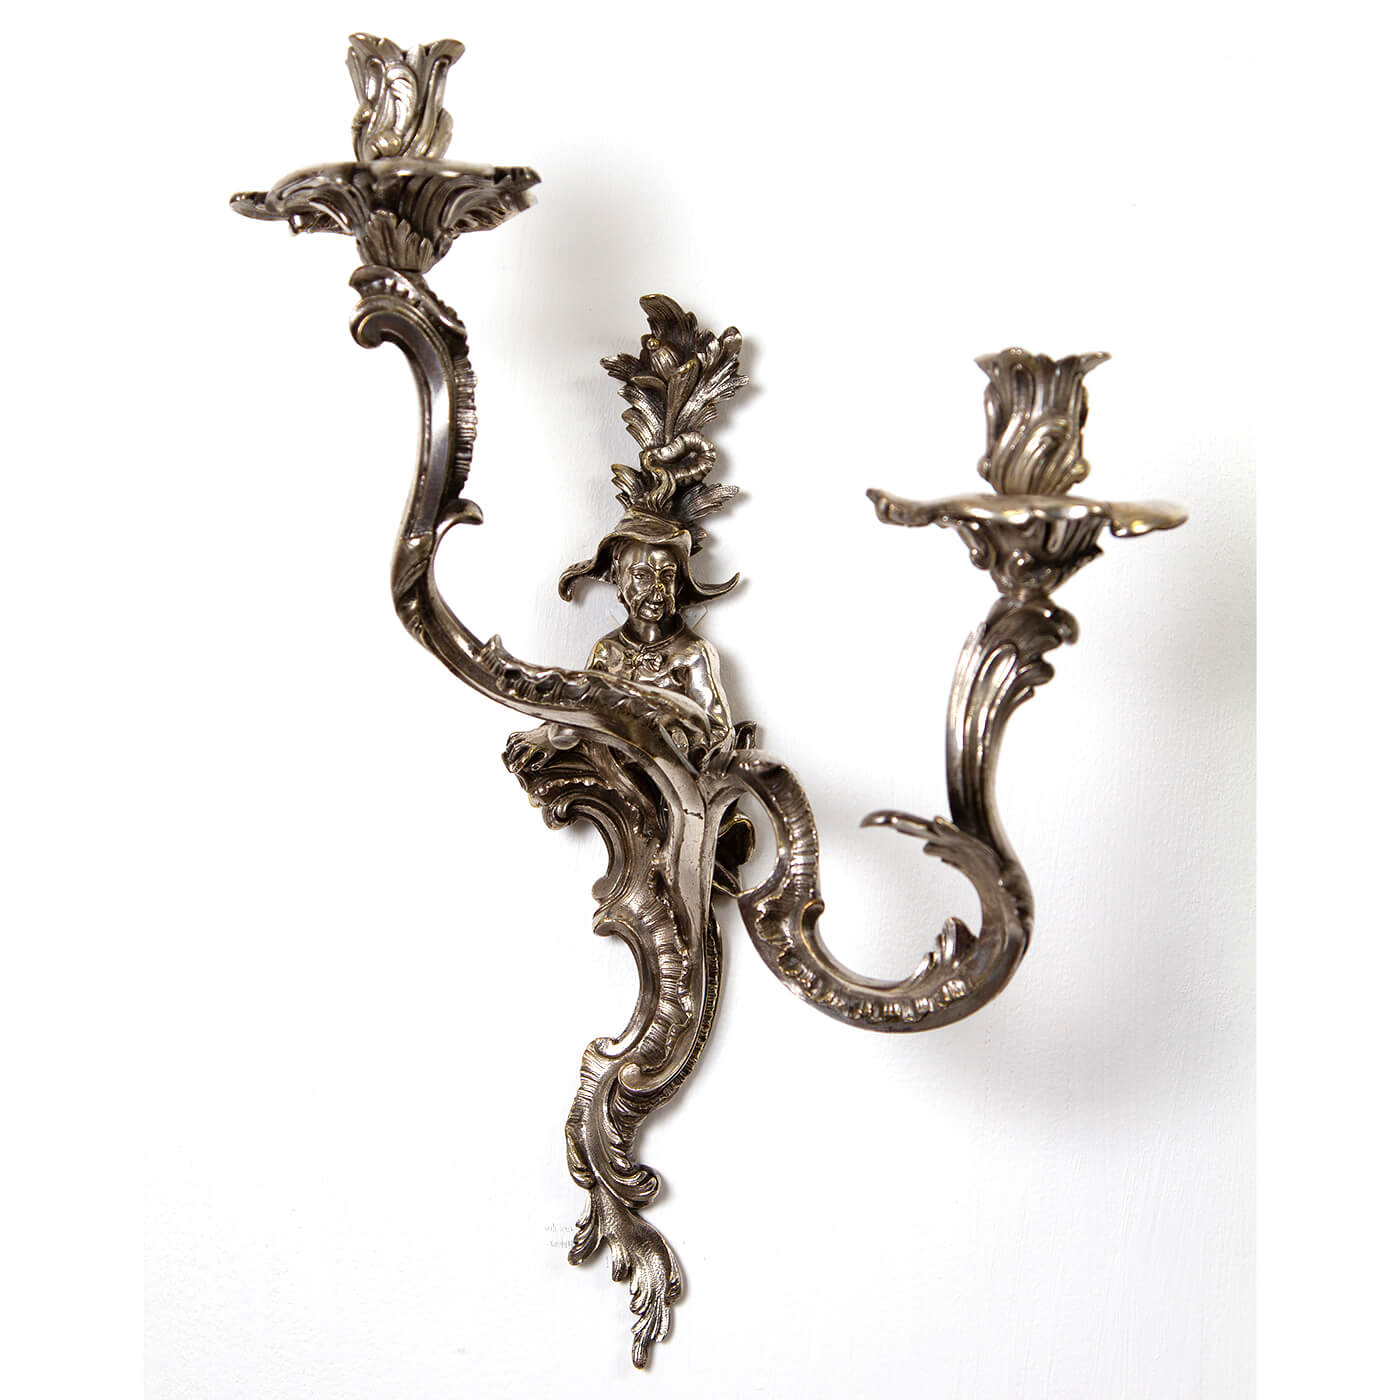 Pair of French Chinoiserie Sconces - English Georgian America